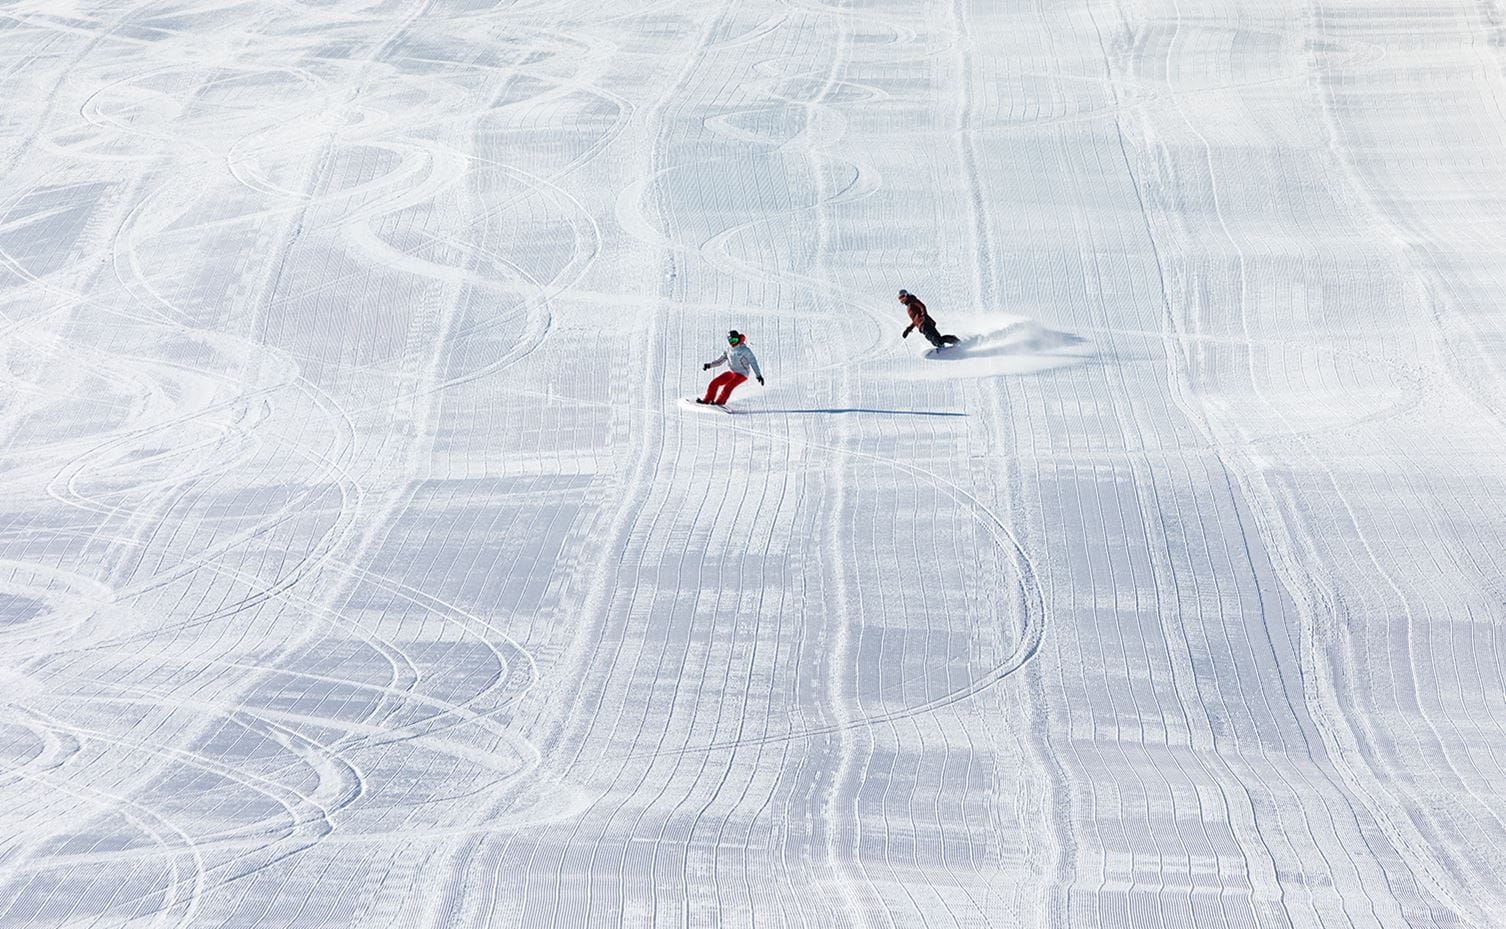 A one-on-one ski lesson on a large groomed run at Aspen Snowmass